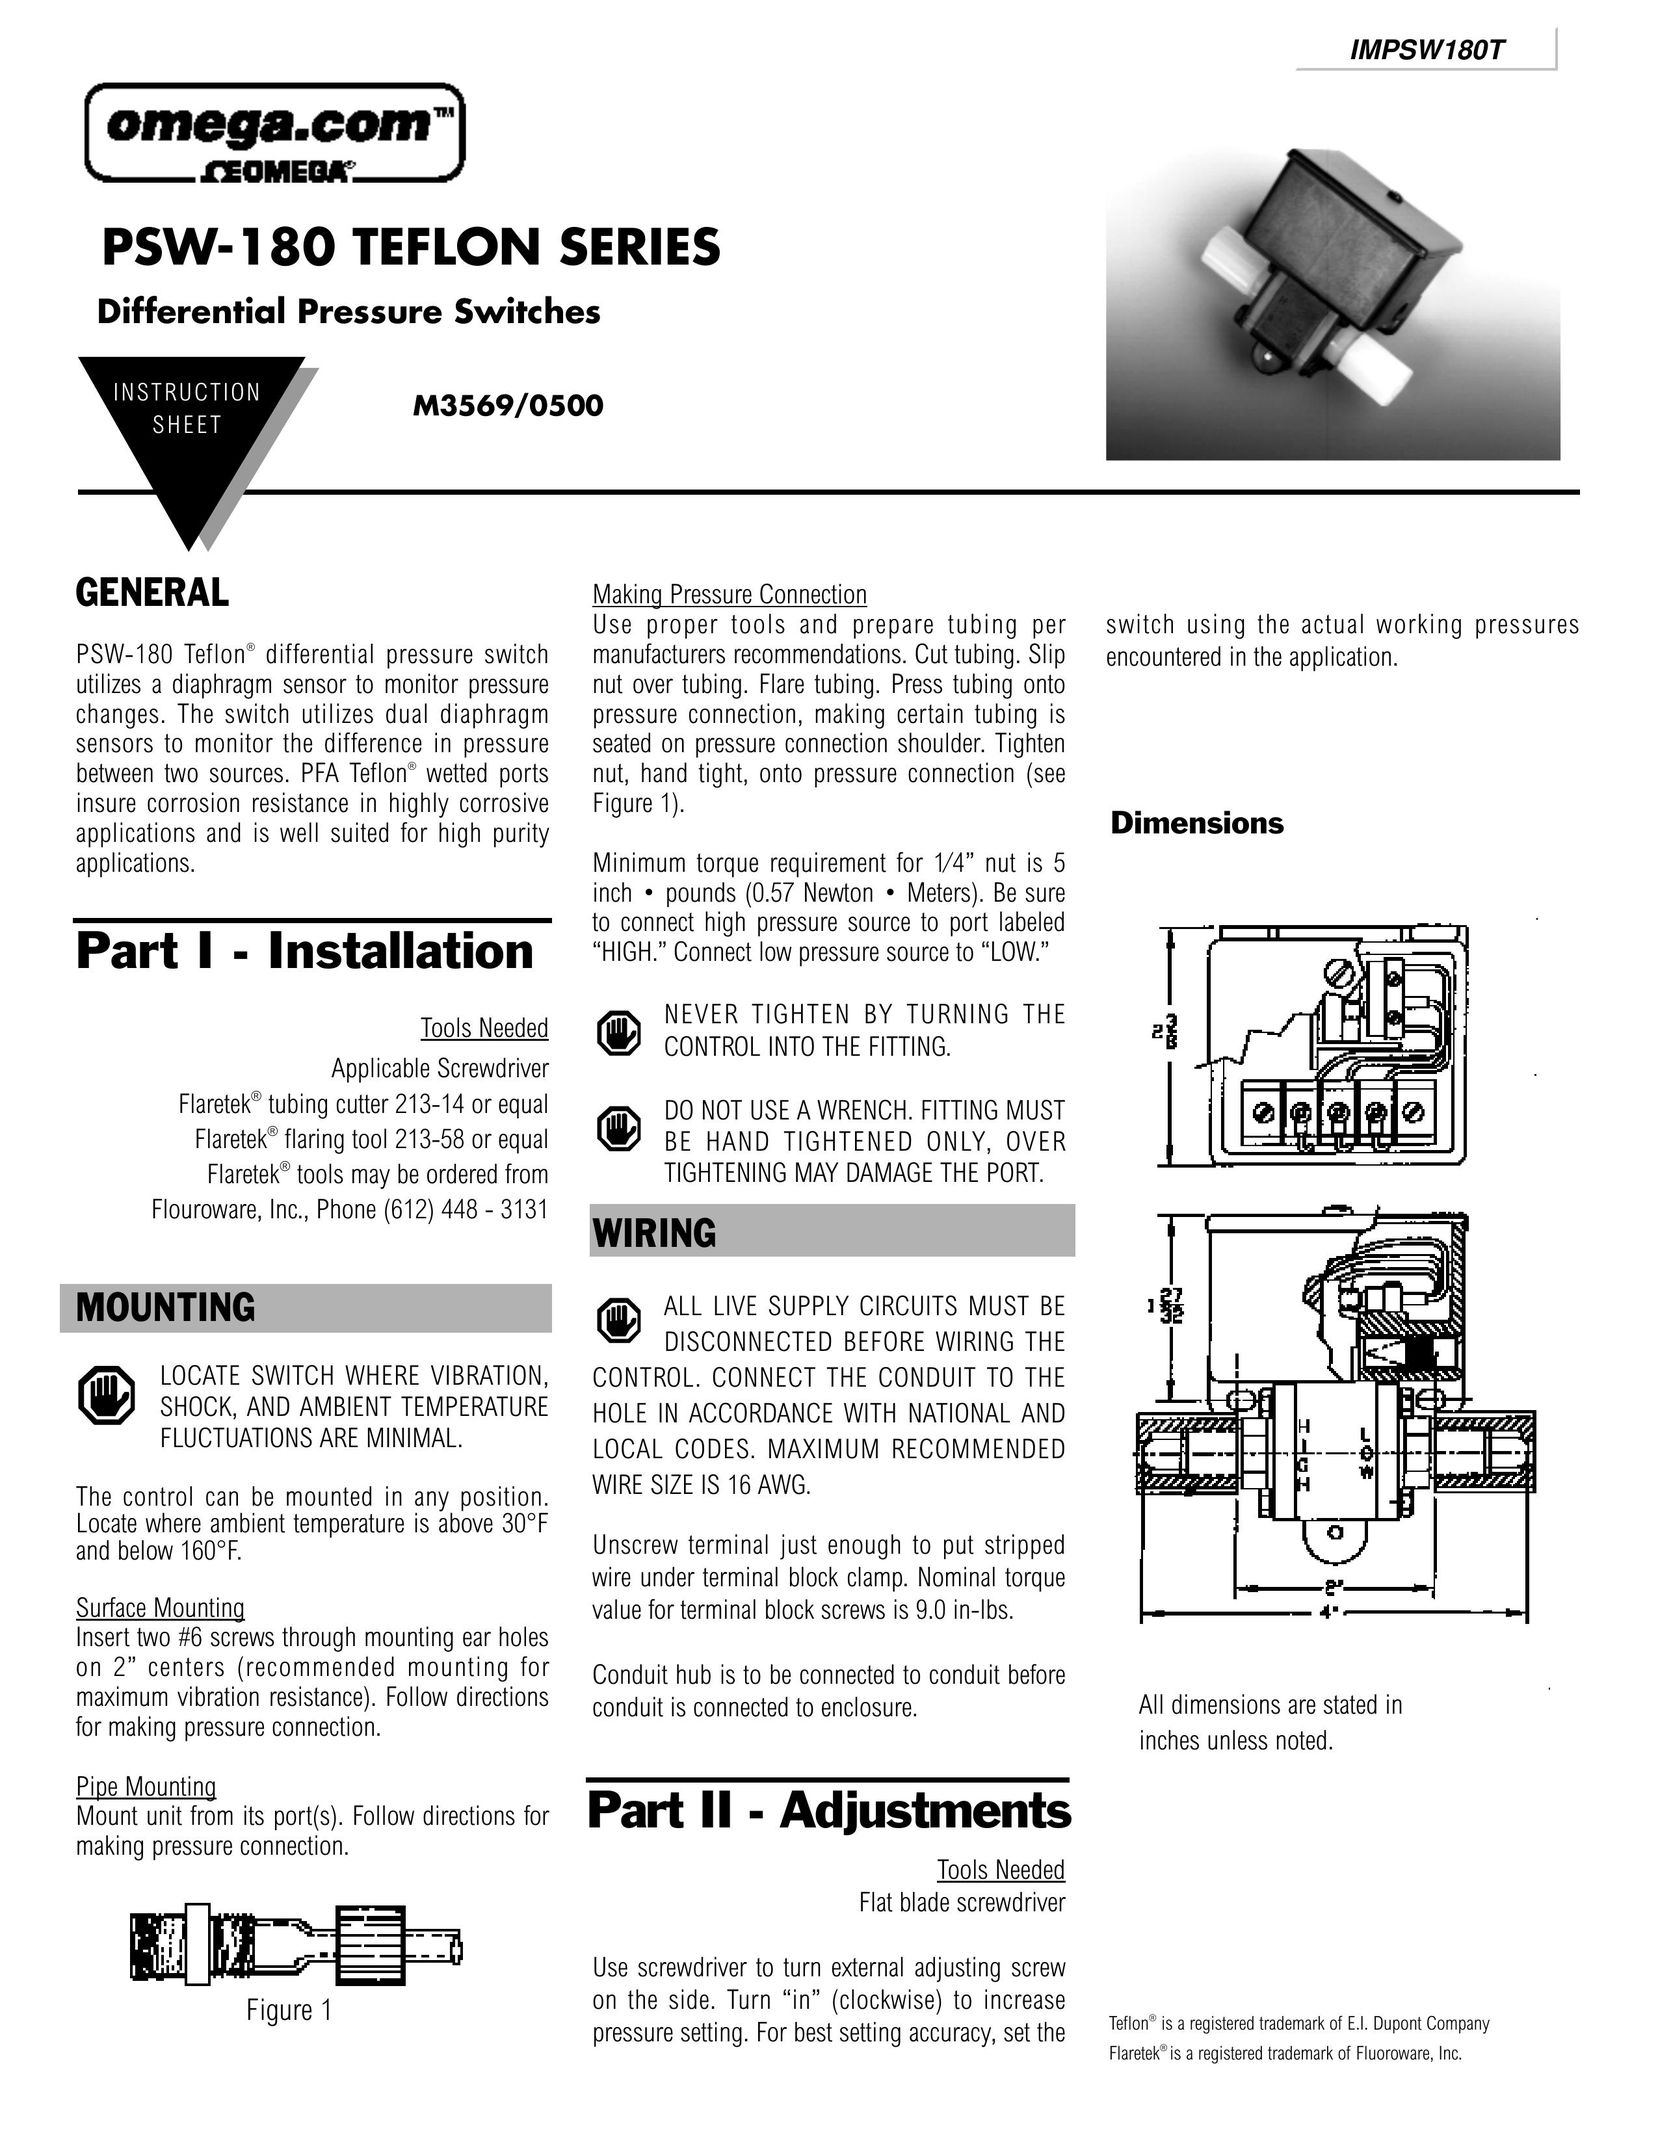 Omega PSW-180 Switch User Manual